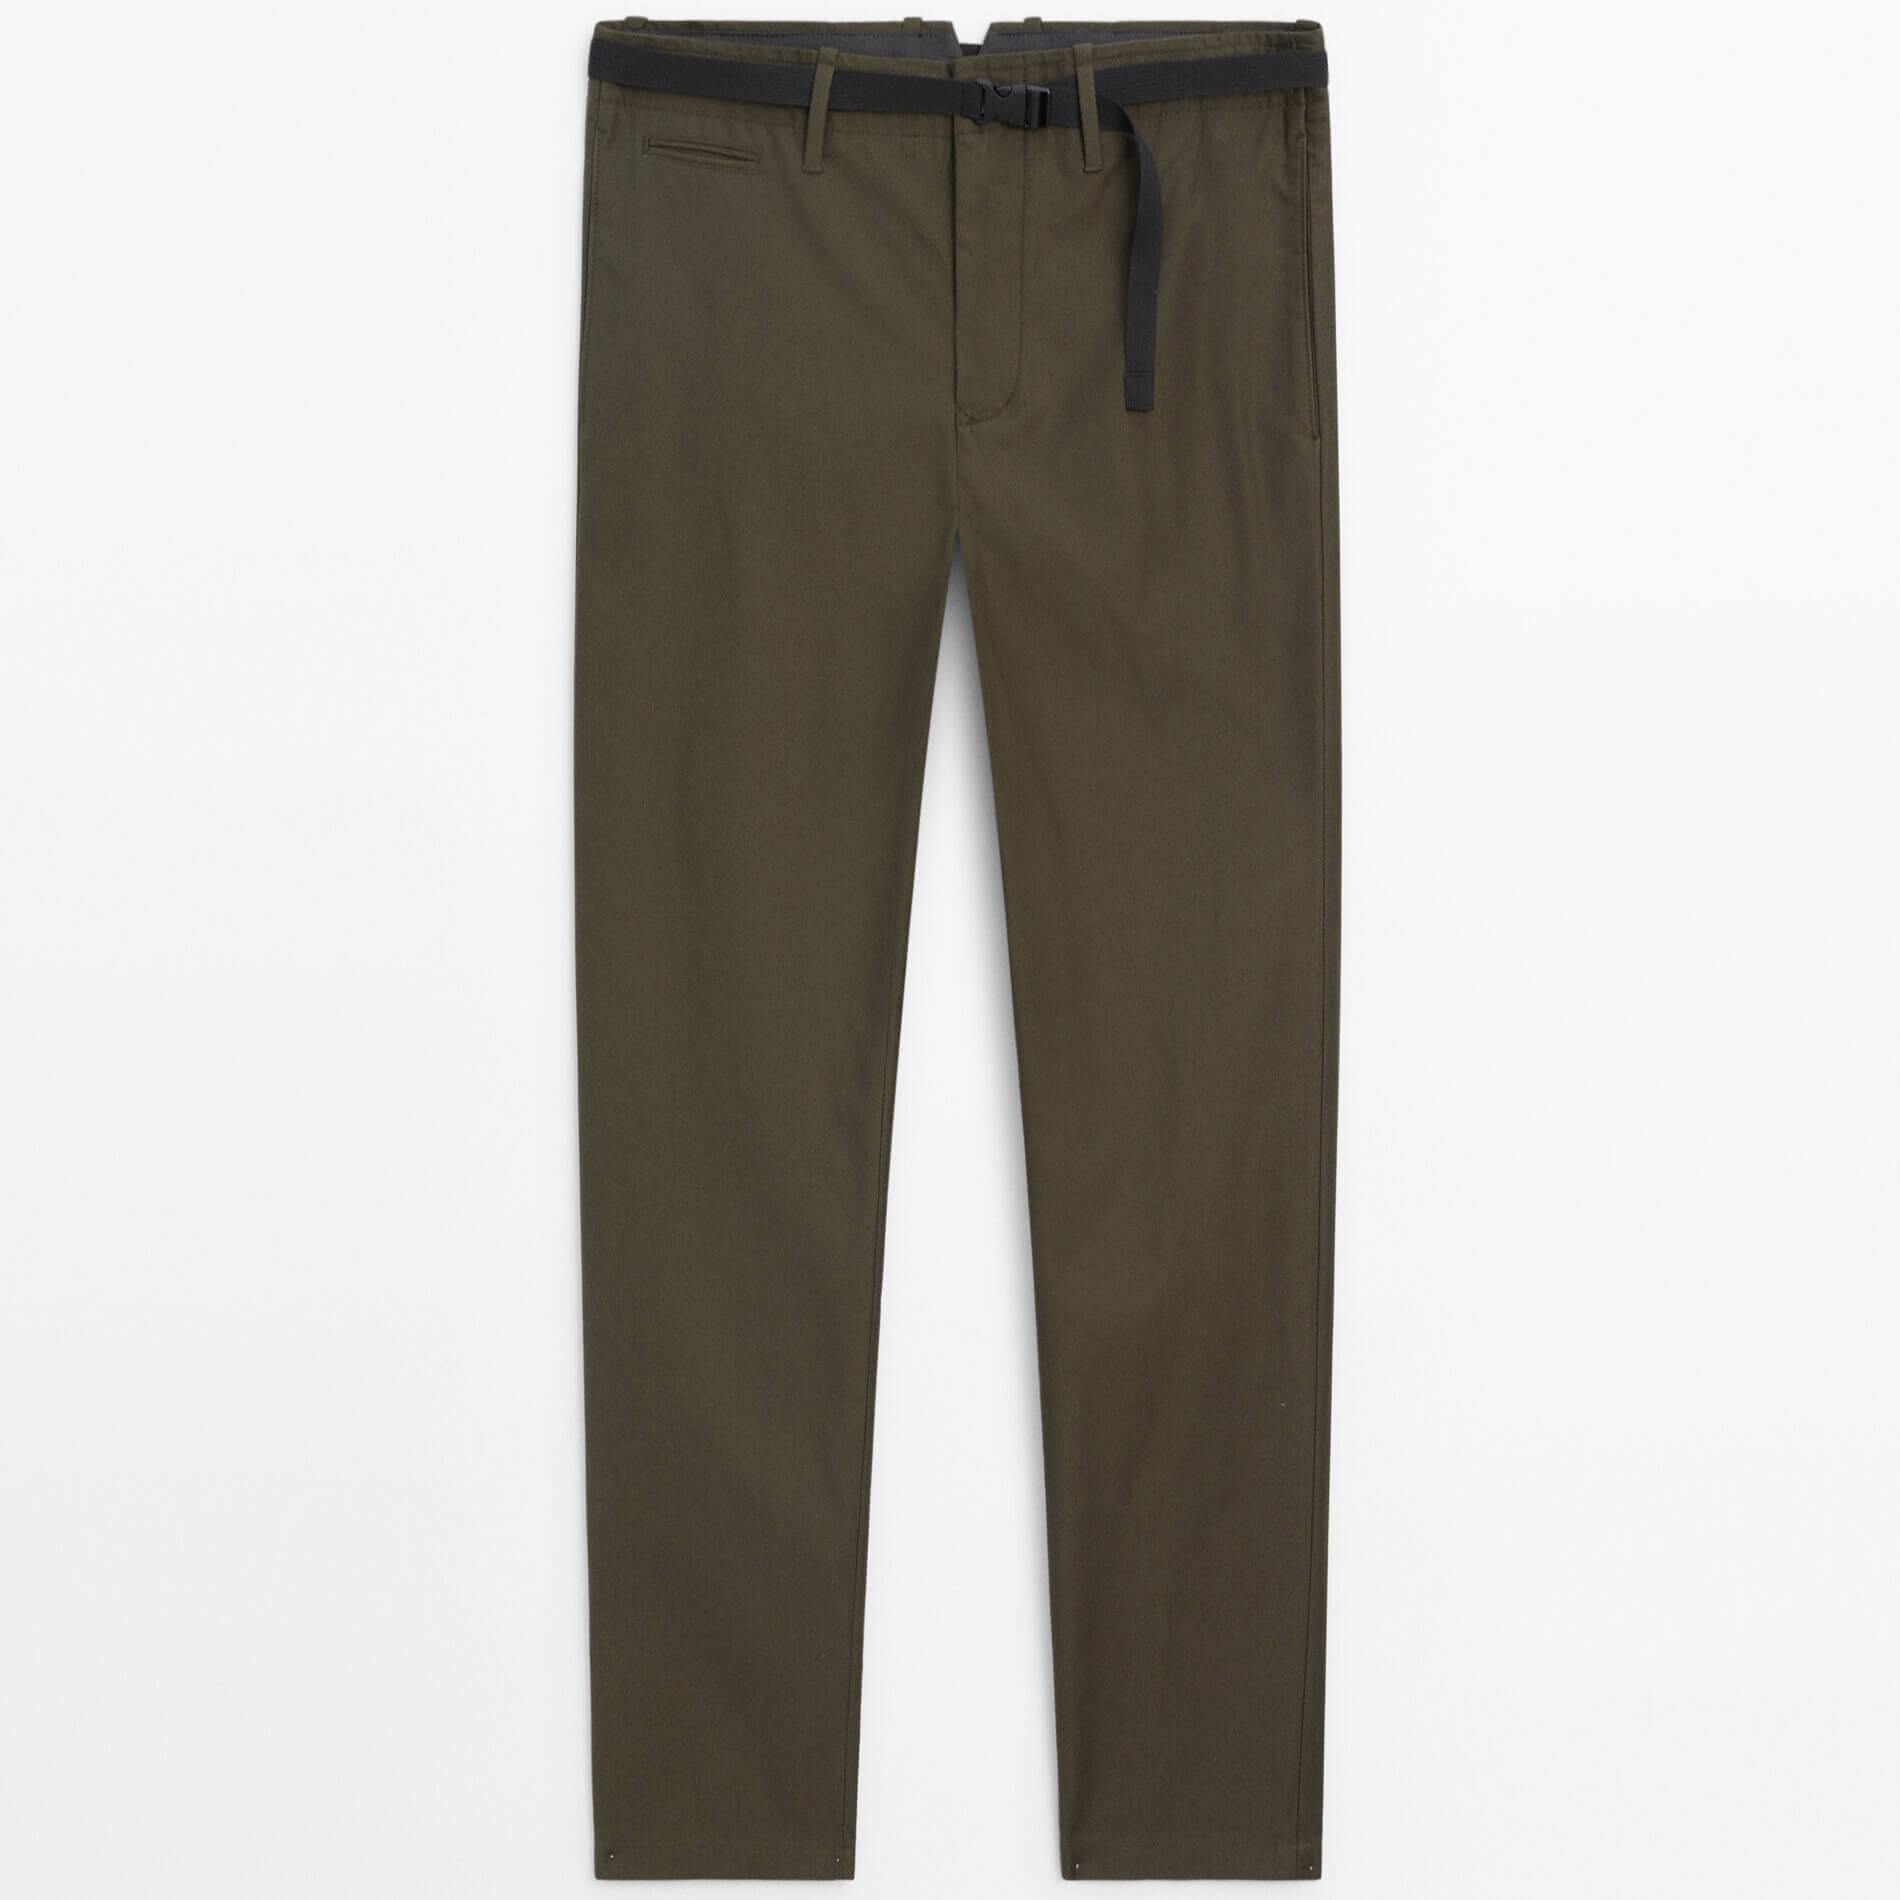 Брюки Massimo Dutti Relaxed Fit Belted Chino, хаки цена и фото